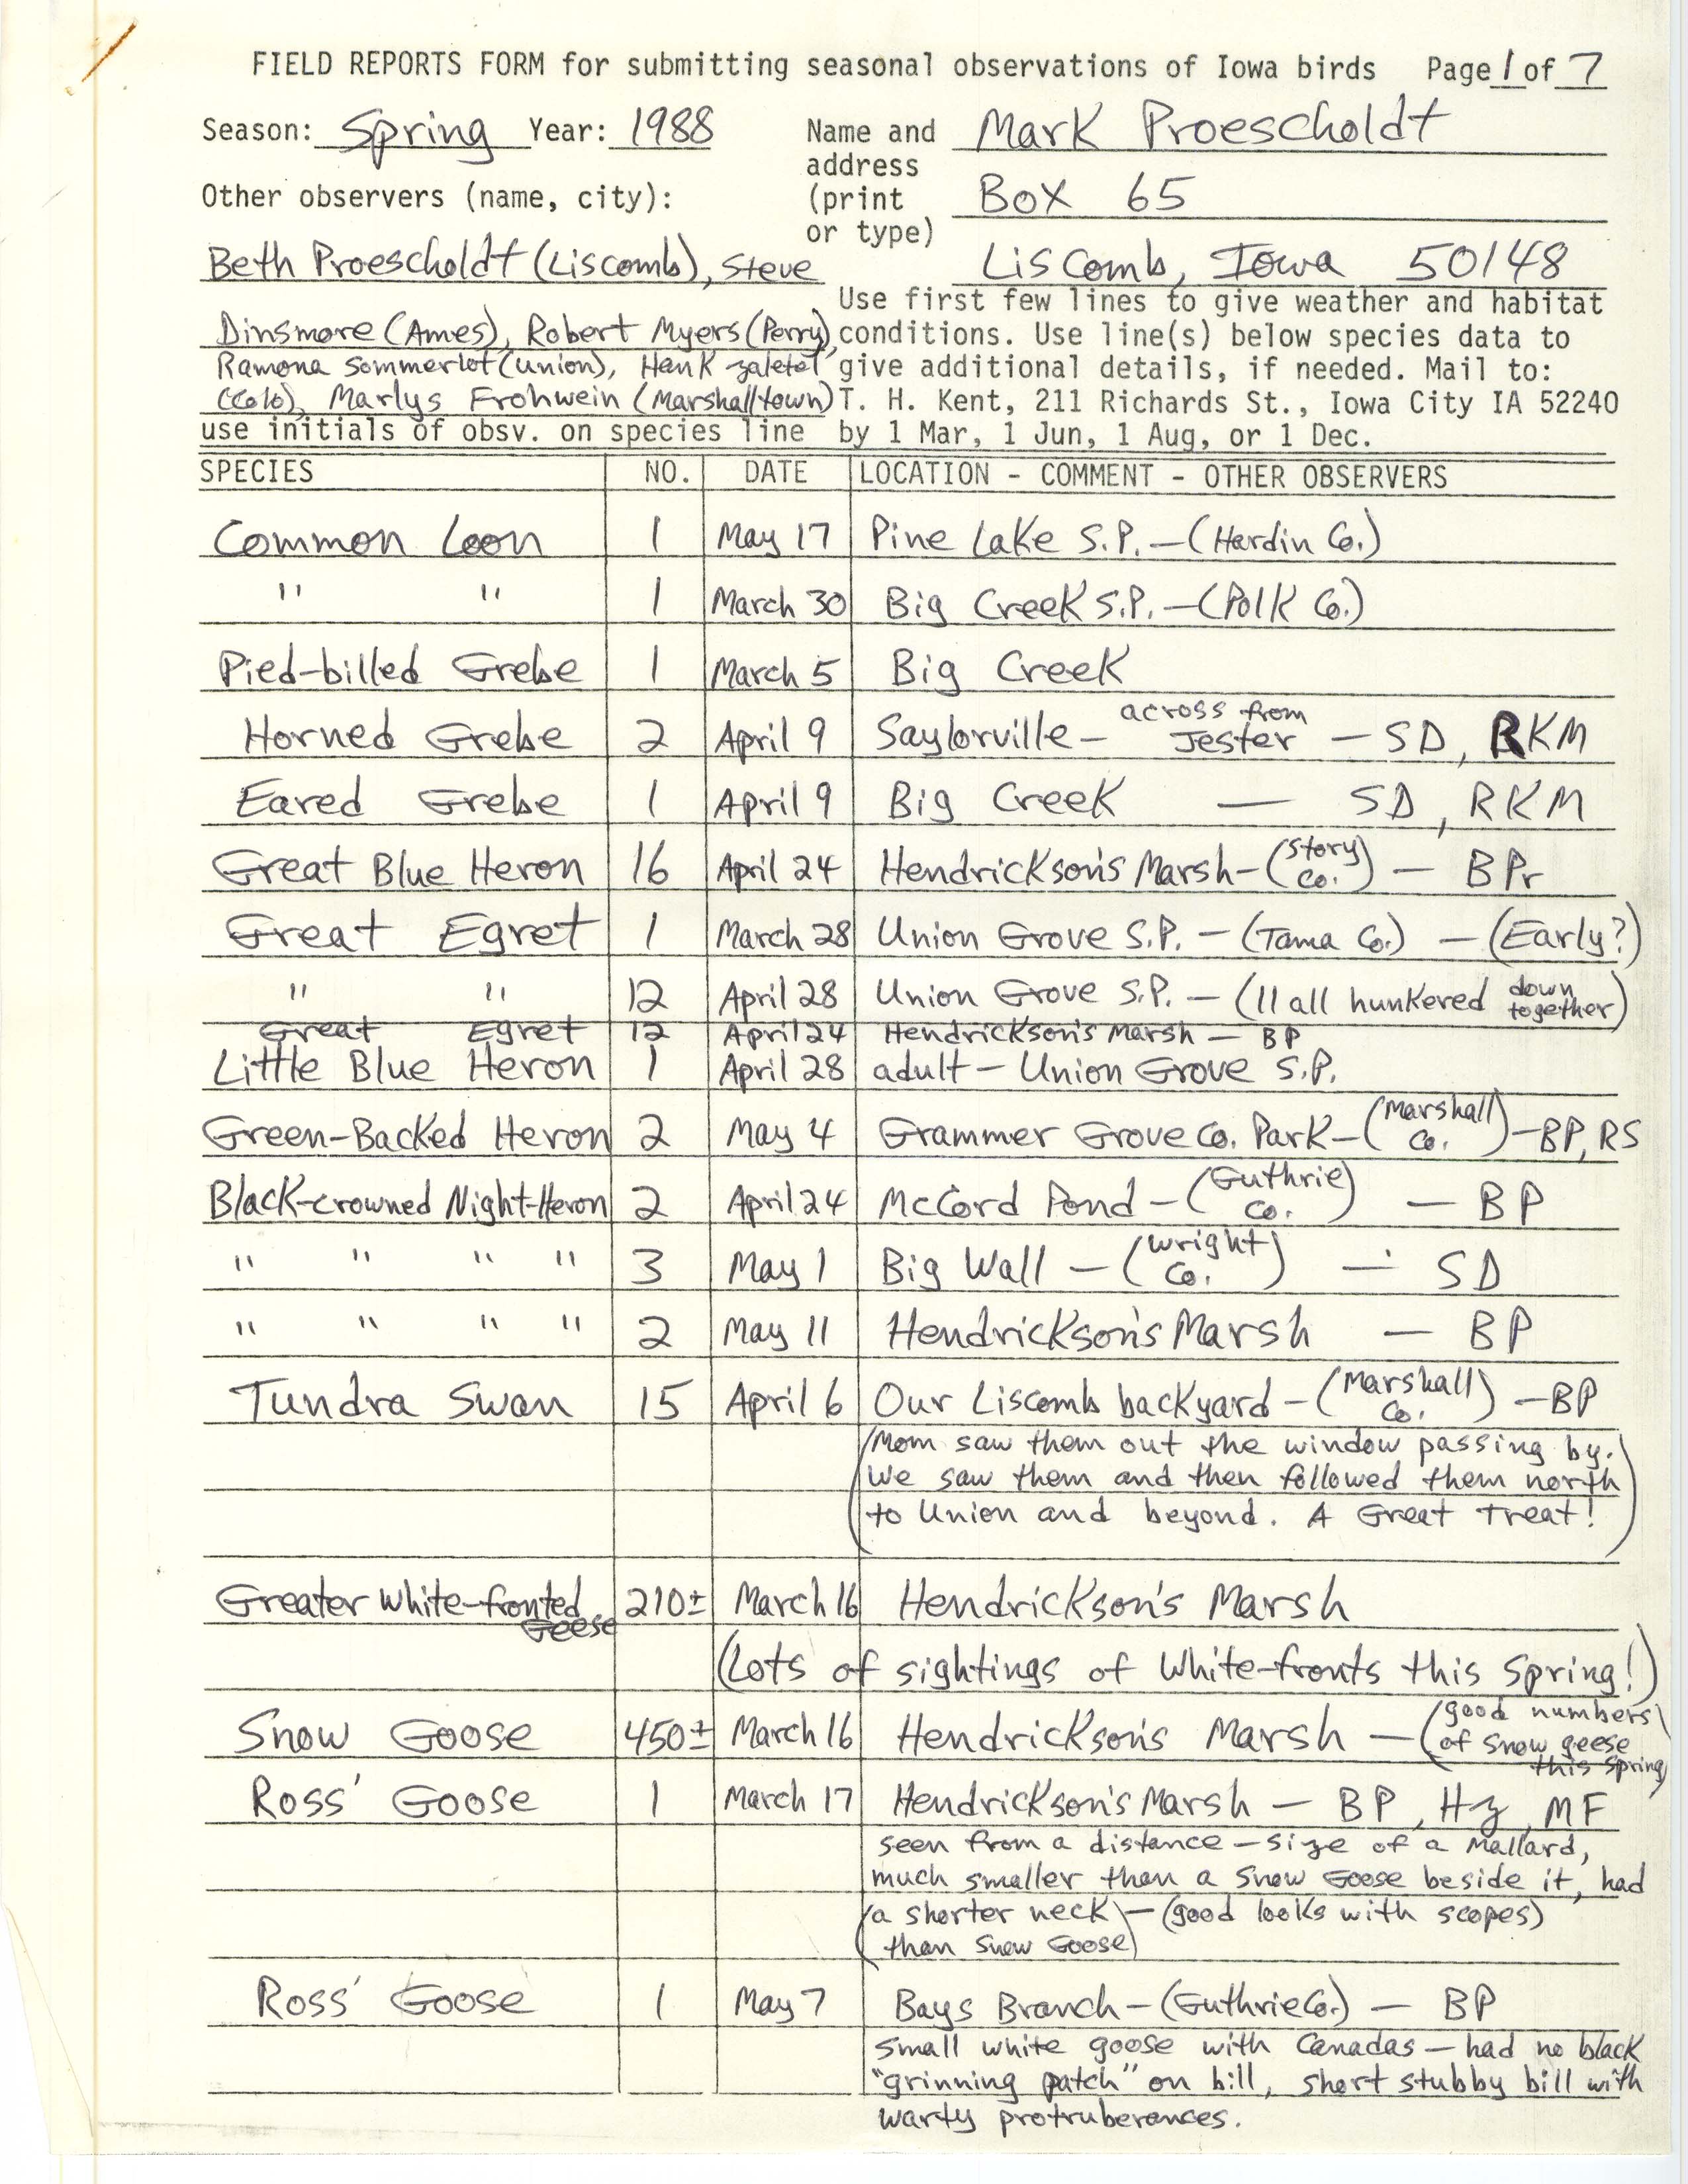 Field reports form for submitting seasonal observations of Iowa birds, Mark Proescholdt, spring 1988